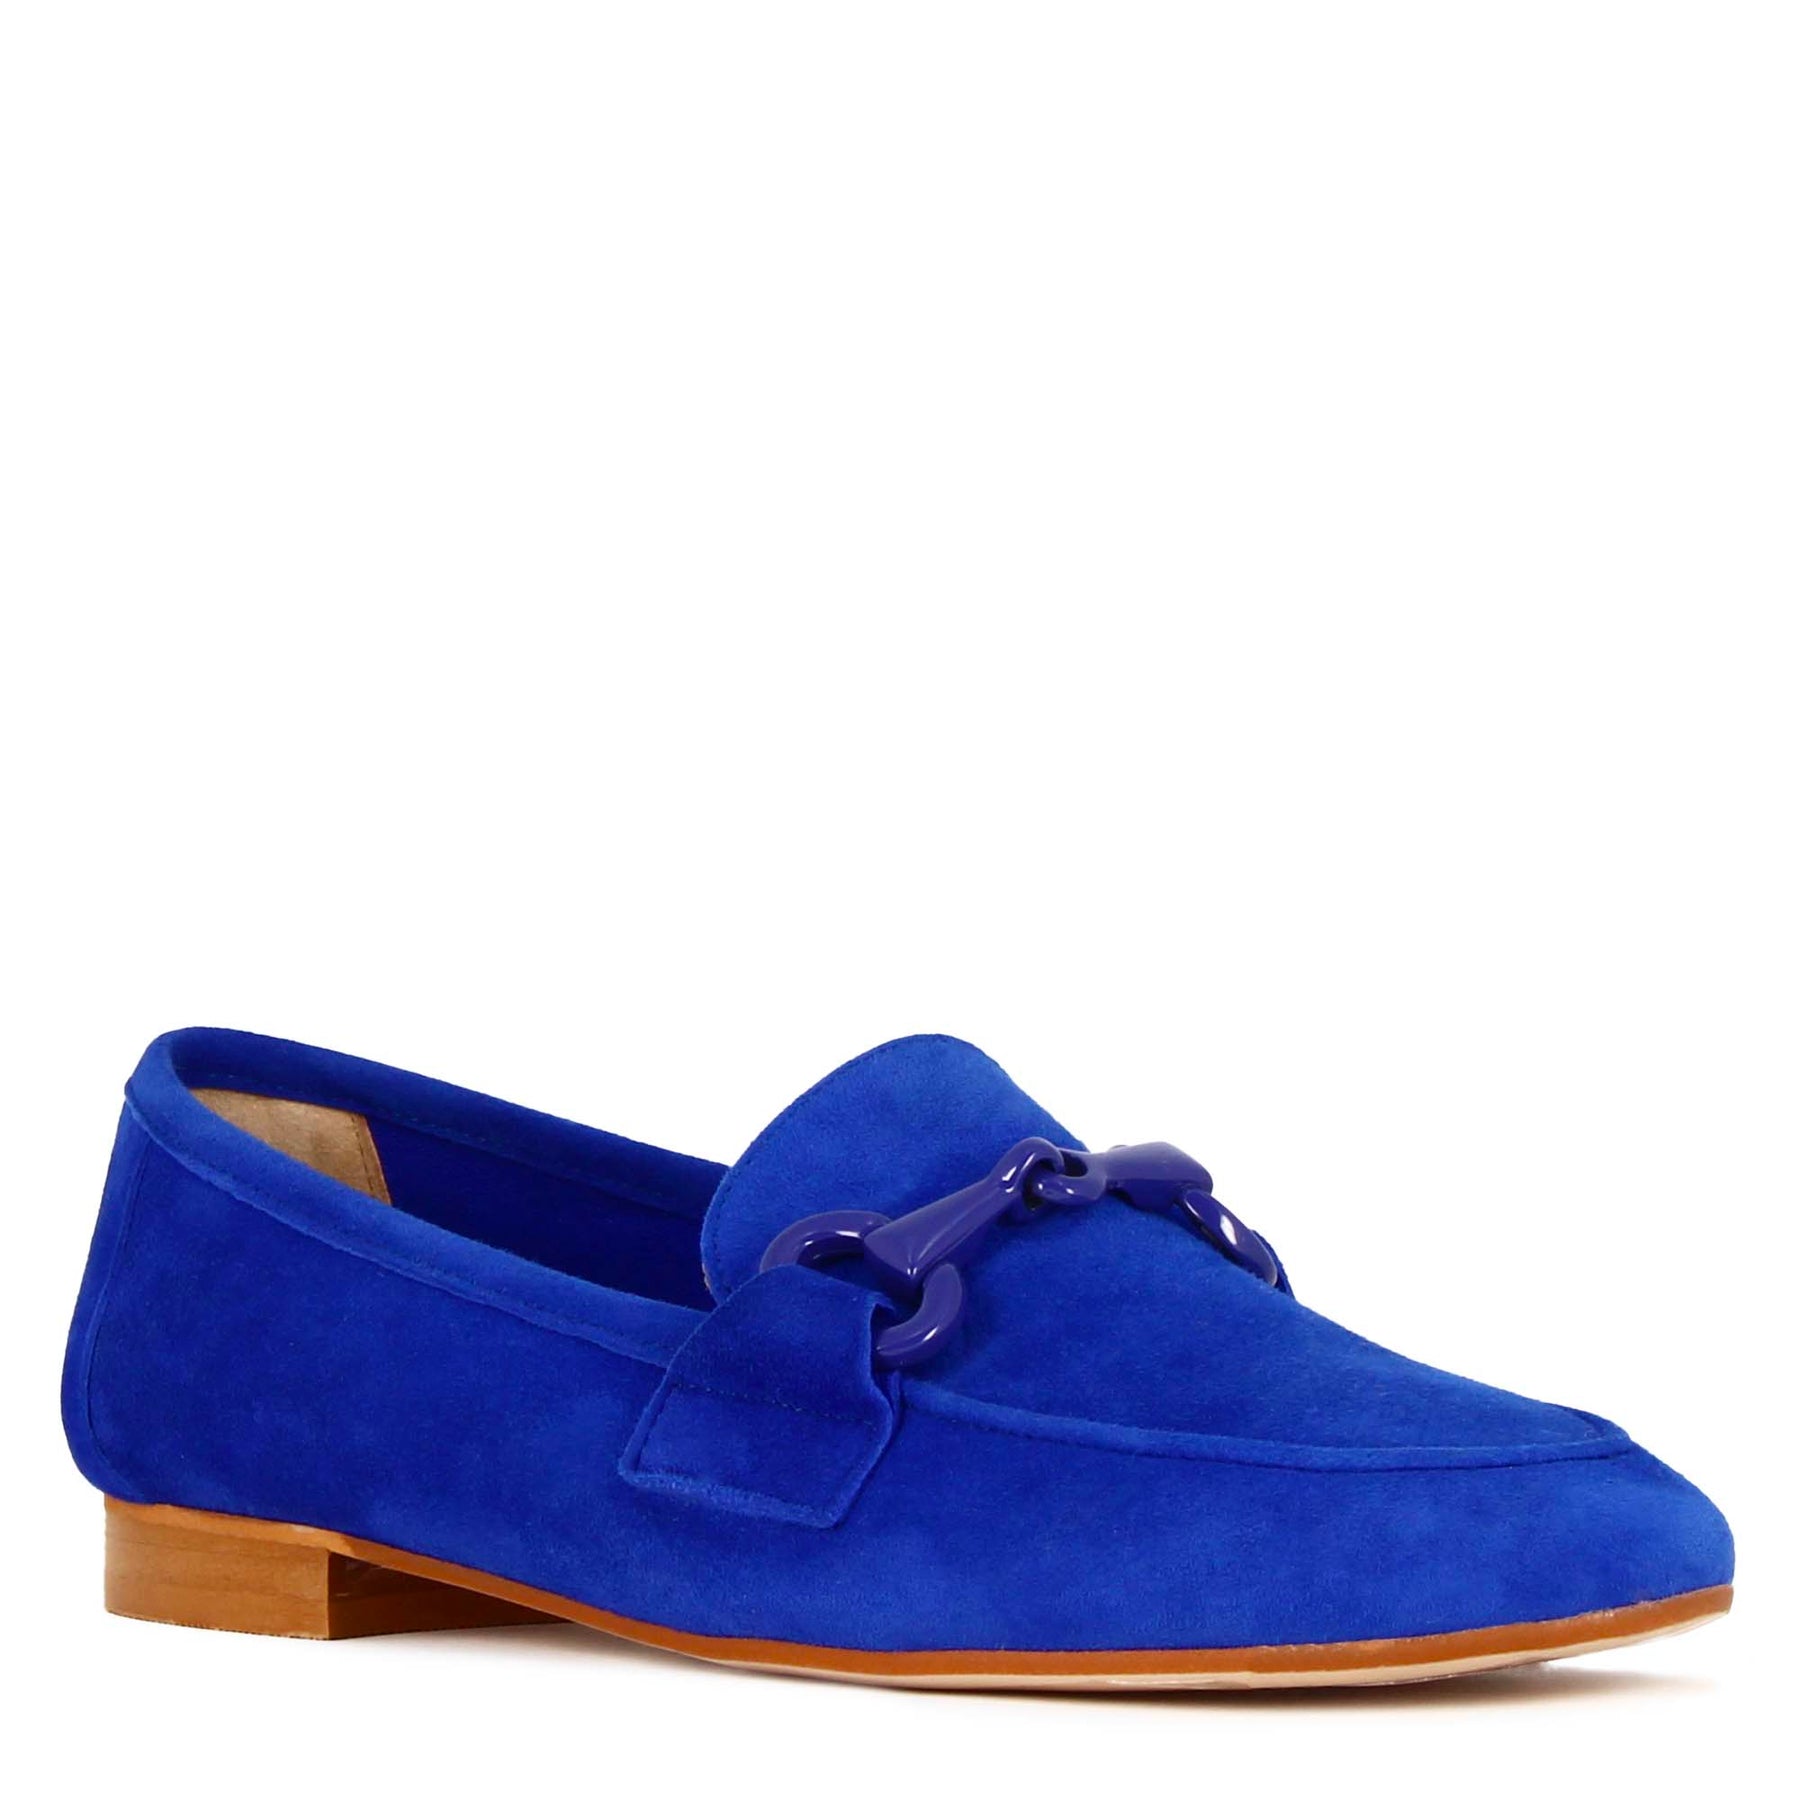 Women's Moccasin in Suede